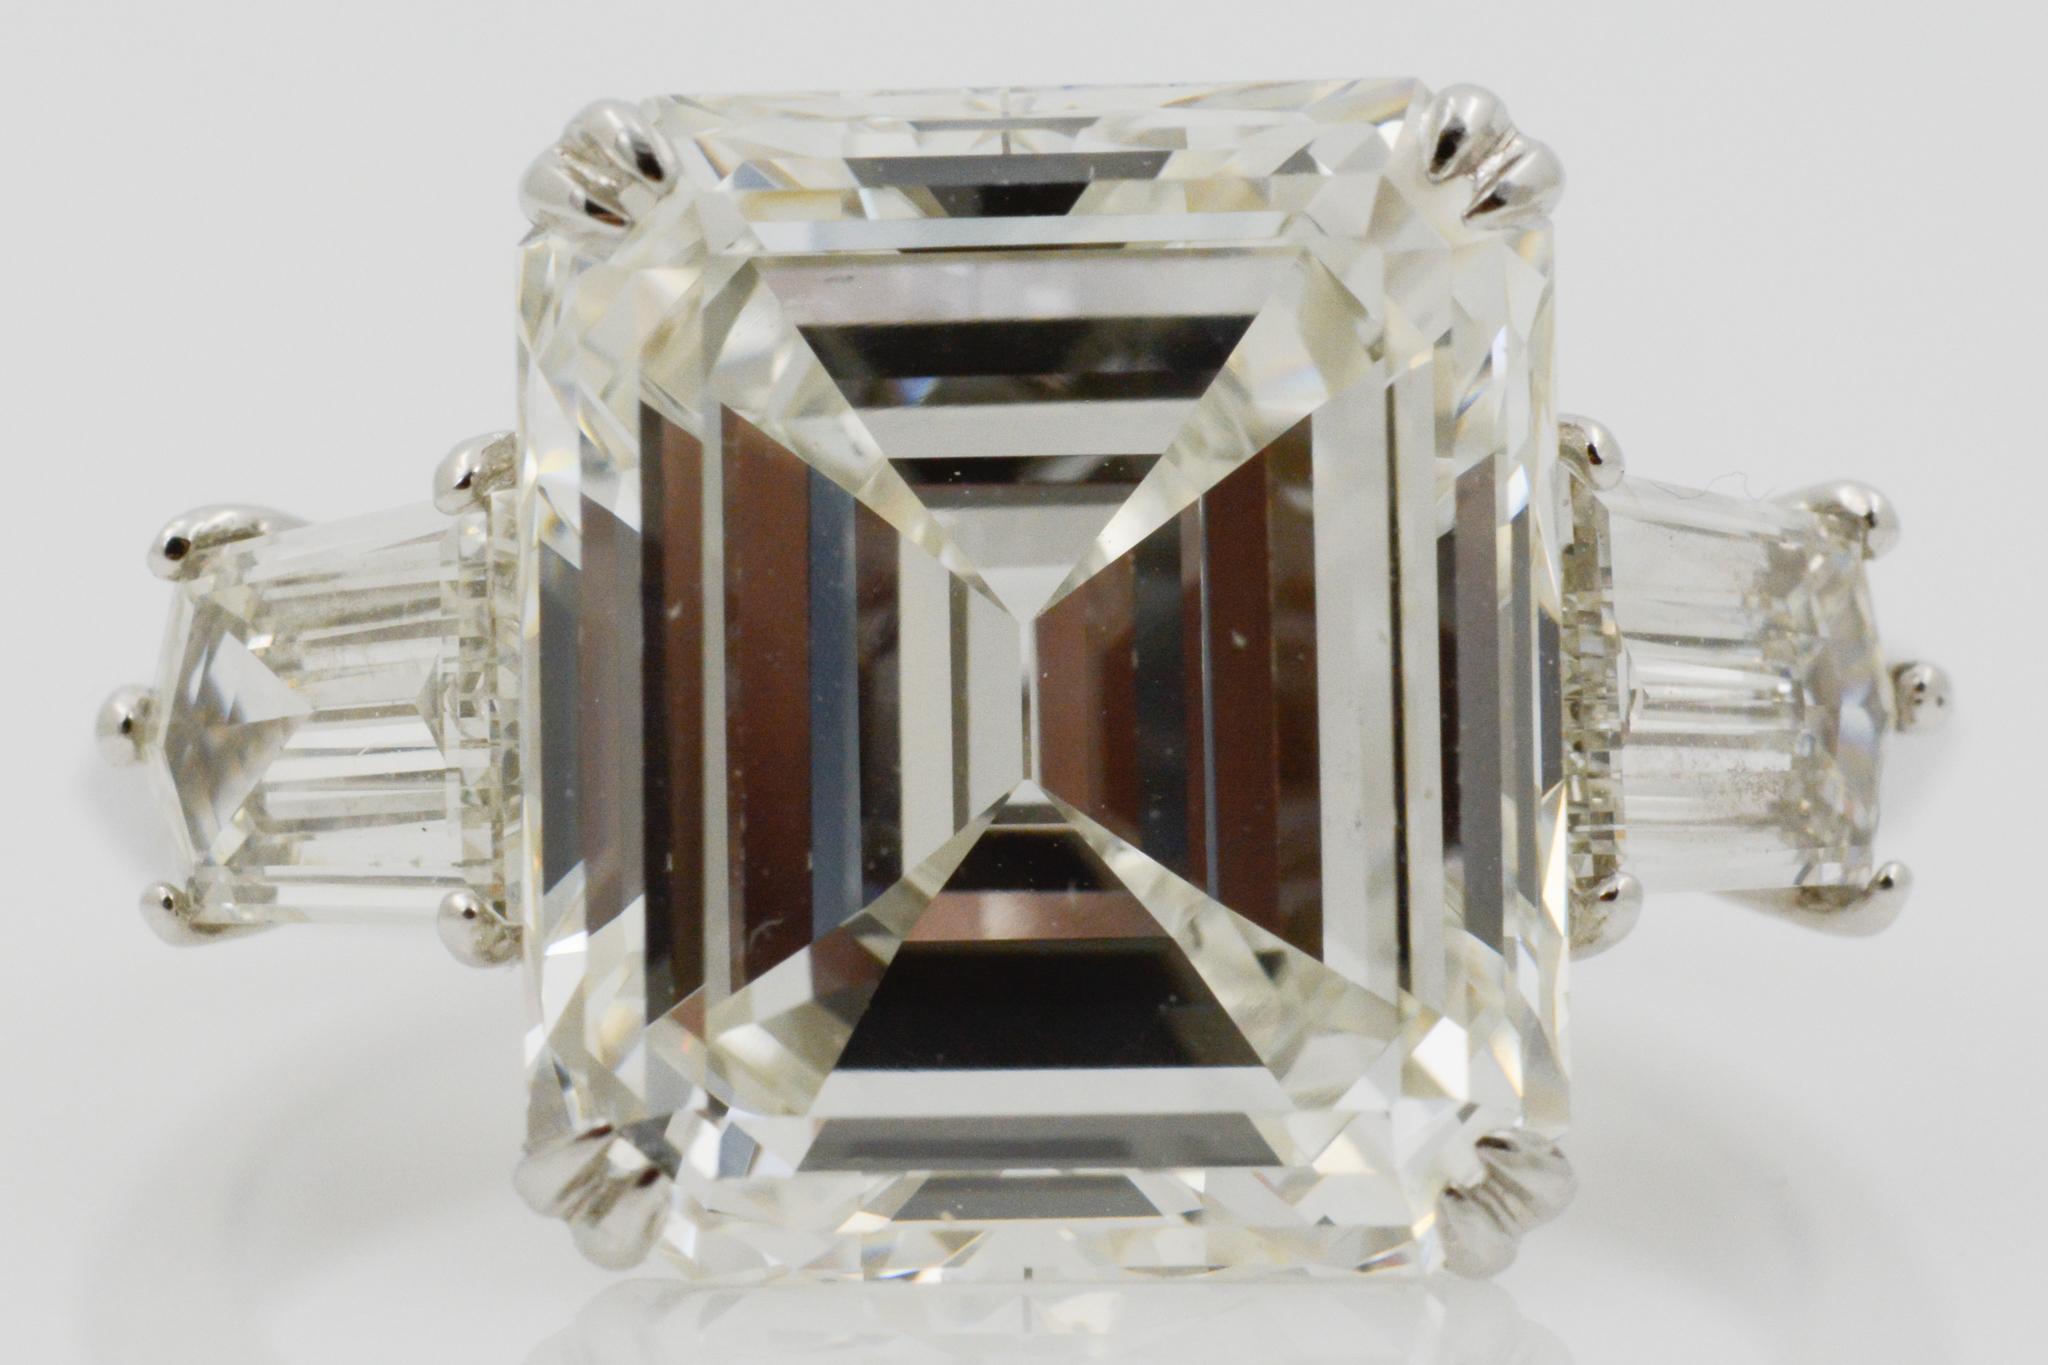 At the center of this platinum GIA certified diamond ring is an approximately 7.71 carat emerald cut diamond with I color and VS1 clarity. It is paired with two shield cut diamonds weighing approximately 1.20 carats, GH color, and VS clarity. The